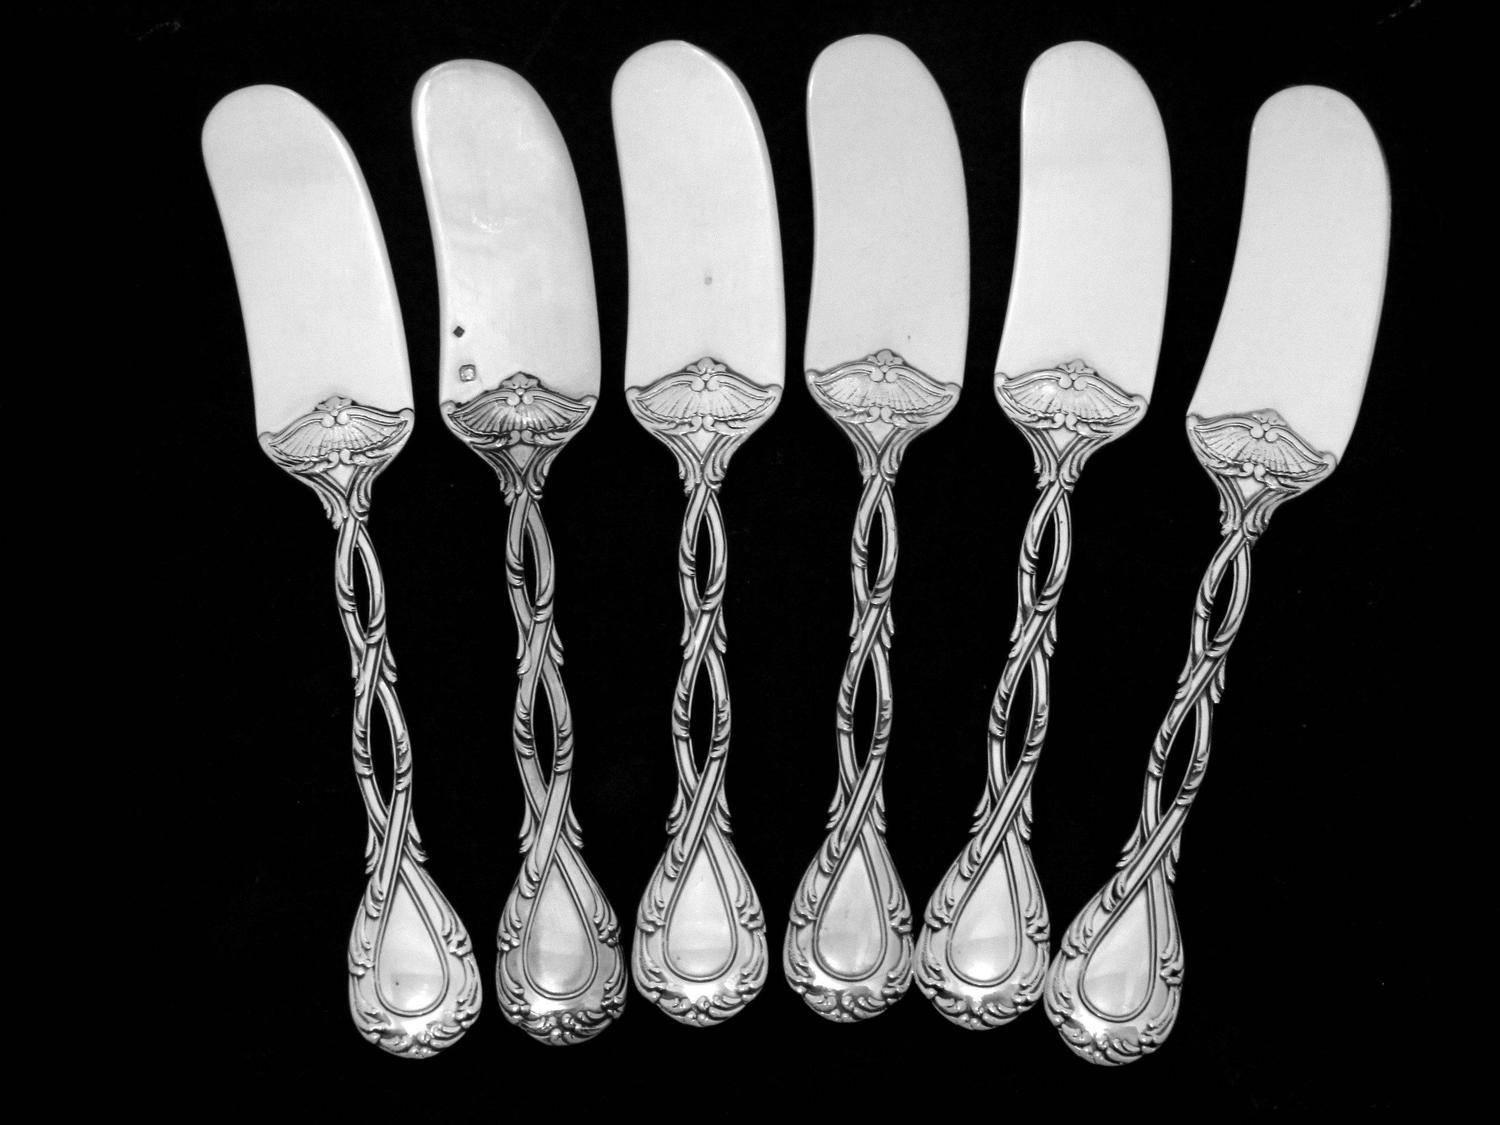 Odiot Tetard French All Sterling Silver Butter Spreader Set of 6 Pieces 1